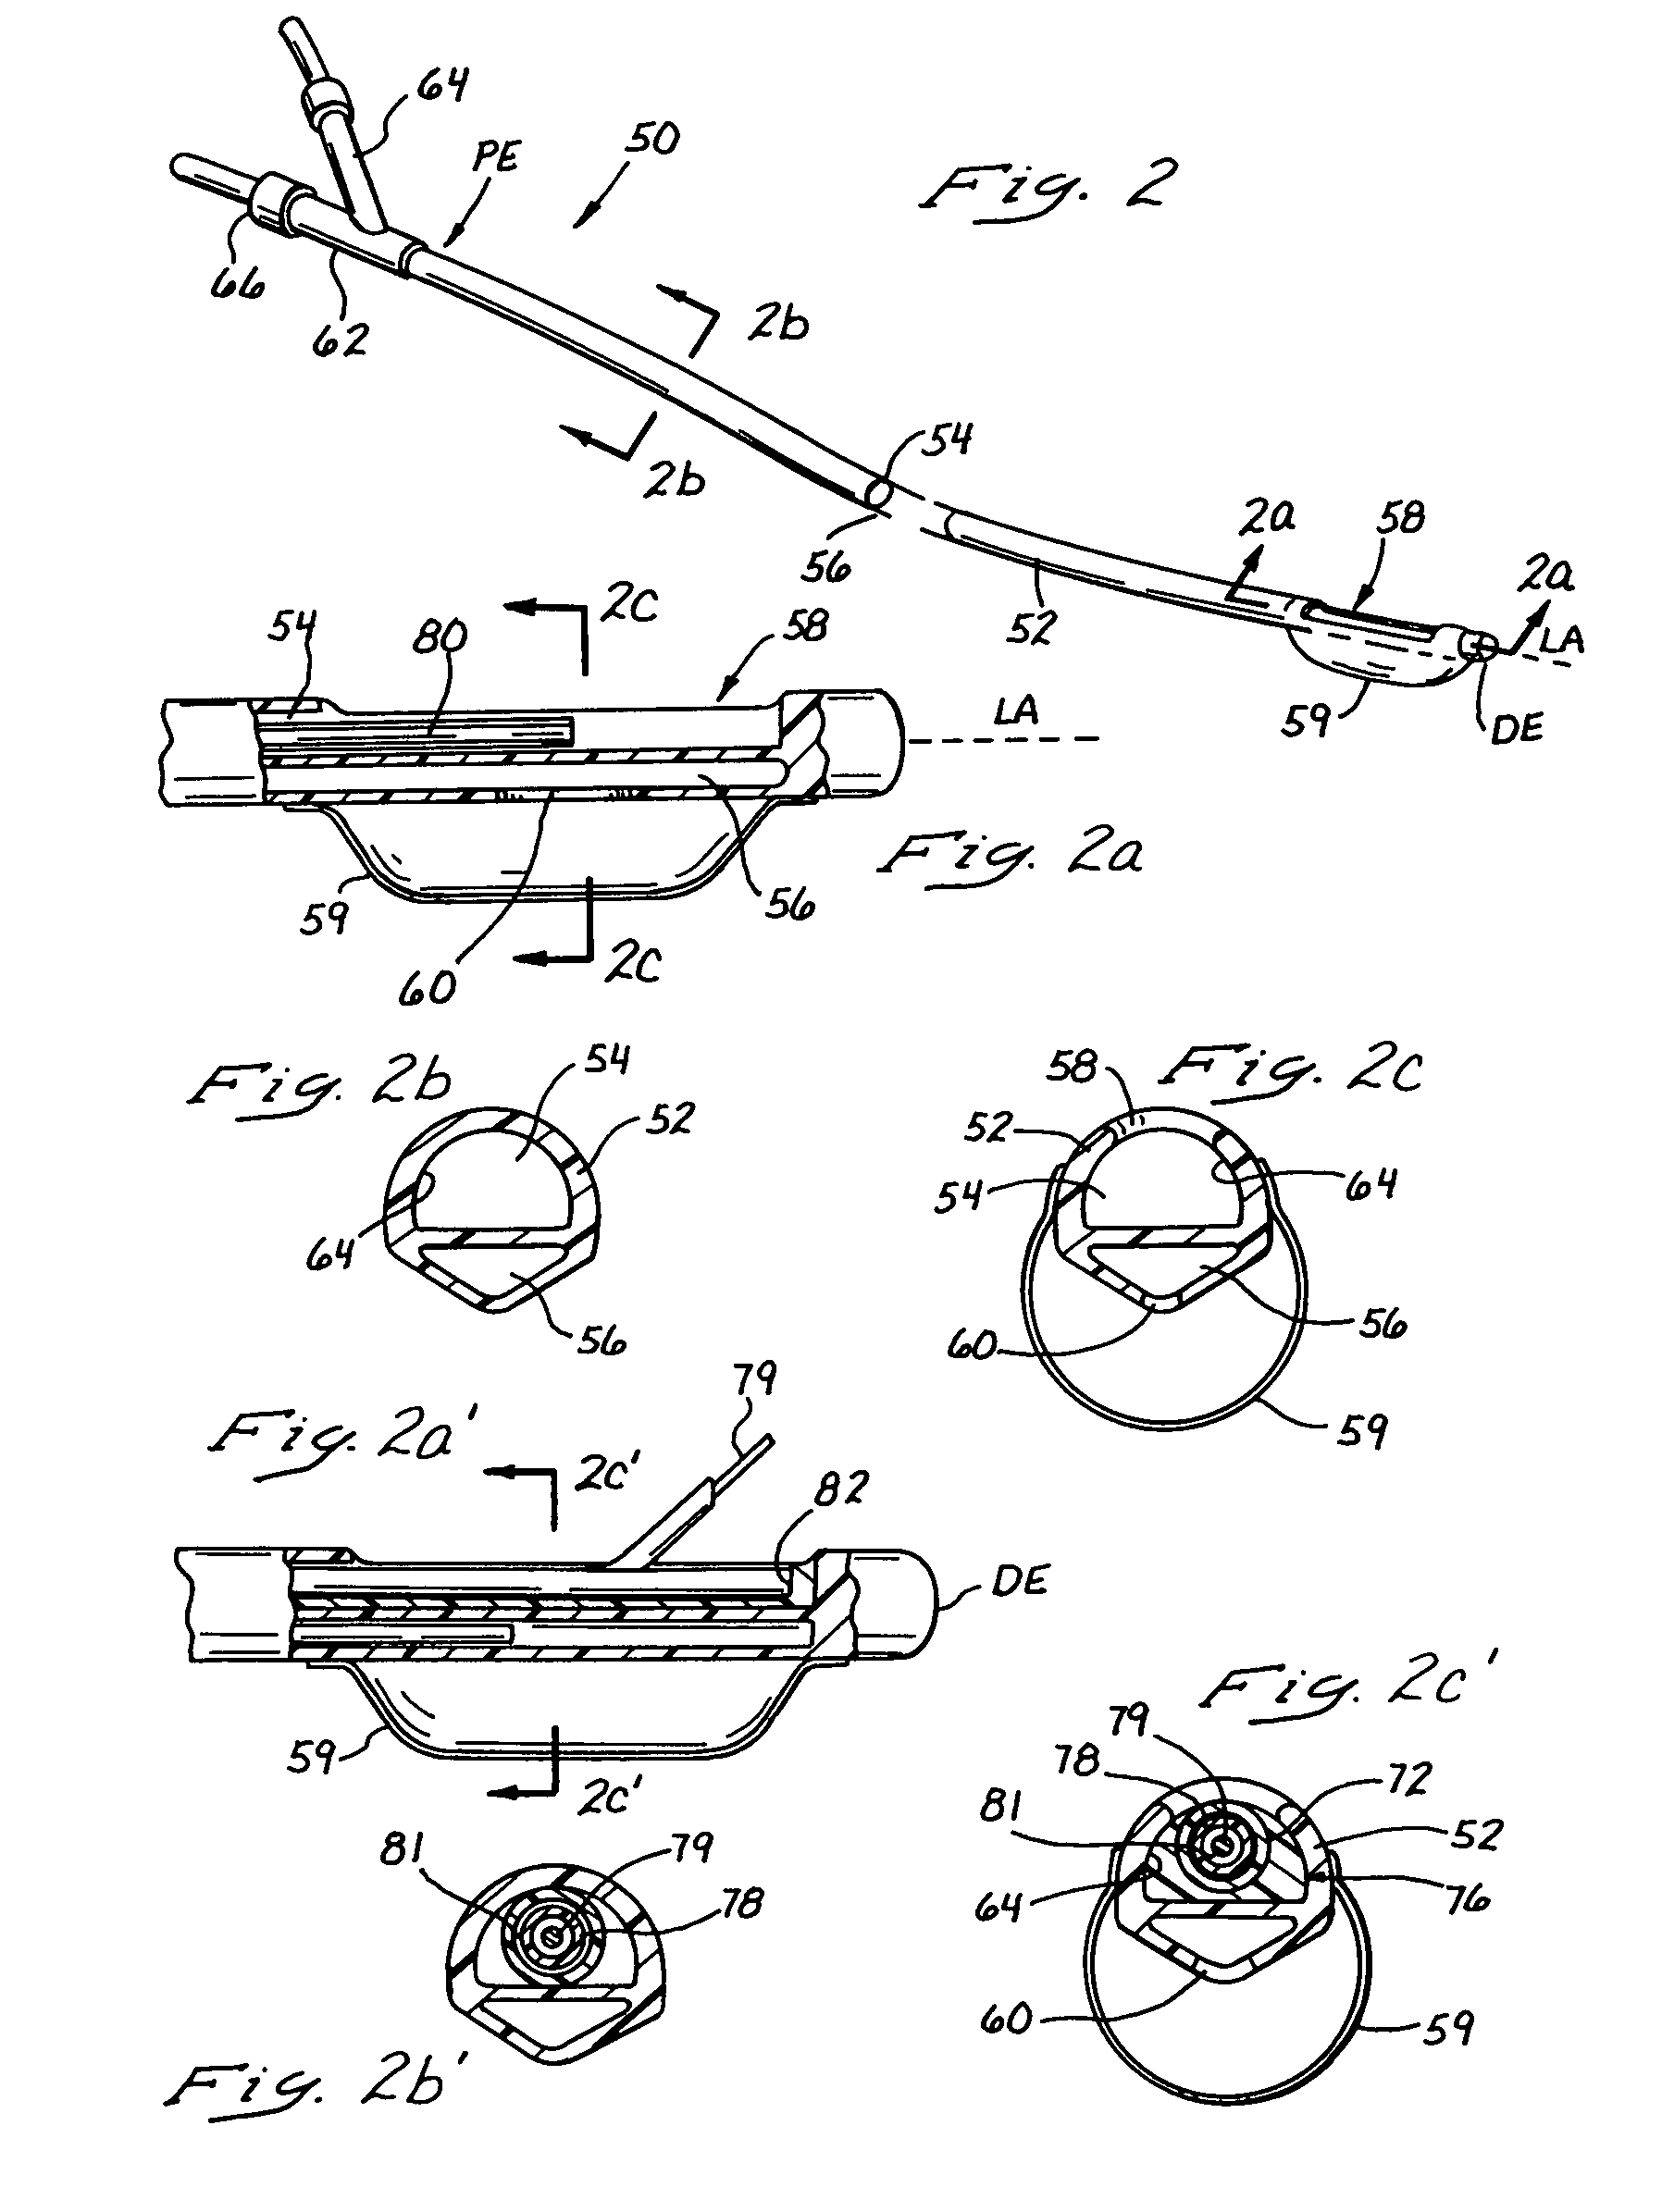 Catheters and related devices for forming passageways between blood vessels or other anatomical structures